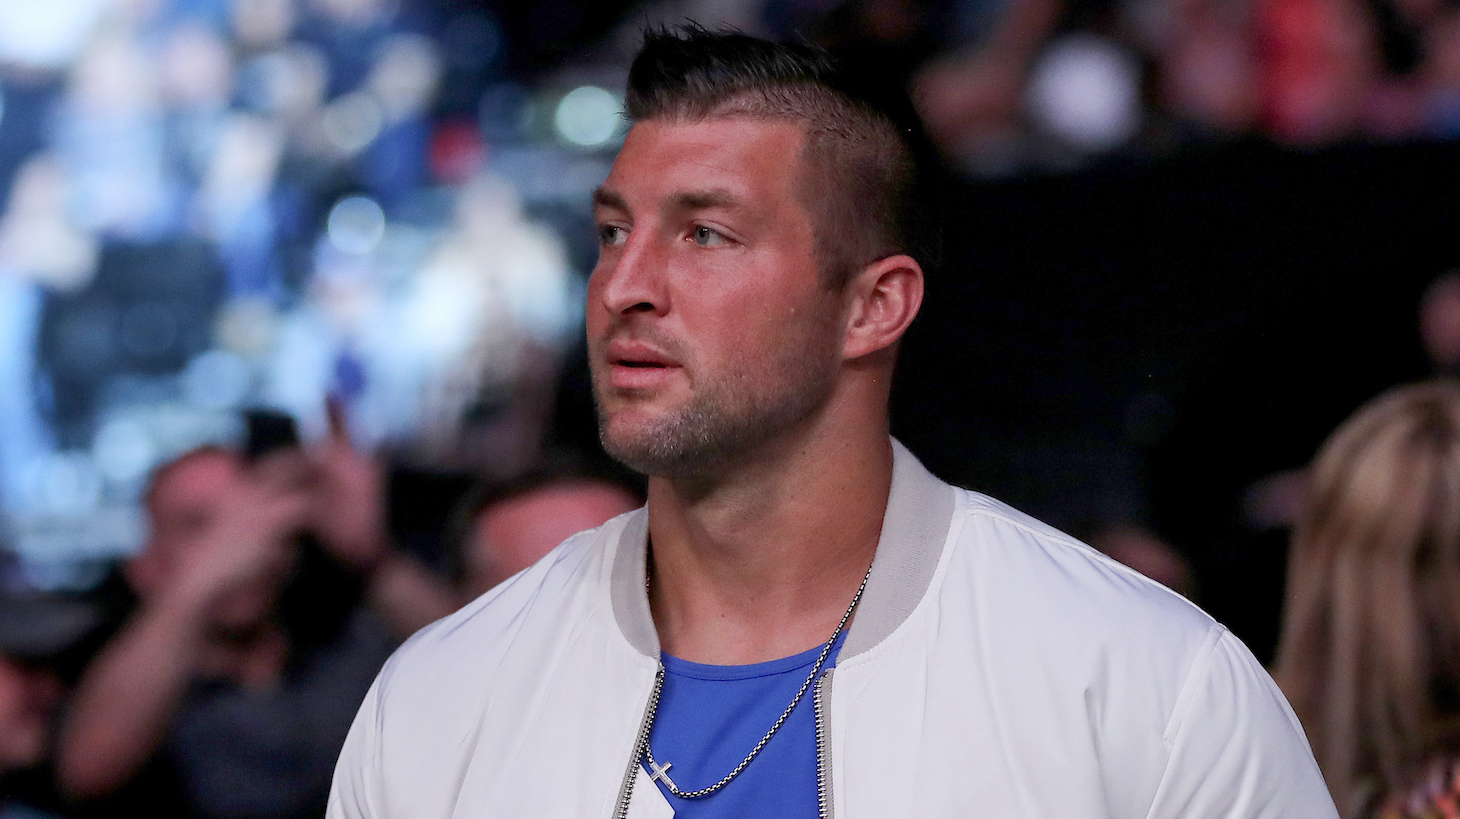 JACKSONVILLE, FL - APRIL 24: Tim Tebow is seen by the octagon during UFC 261 at VyStar Veterans Memorial Arena on April 24, 2021 in Jacksonville, Florida. (Photo by Alex Menendez/Getty Images)